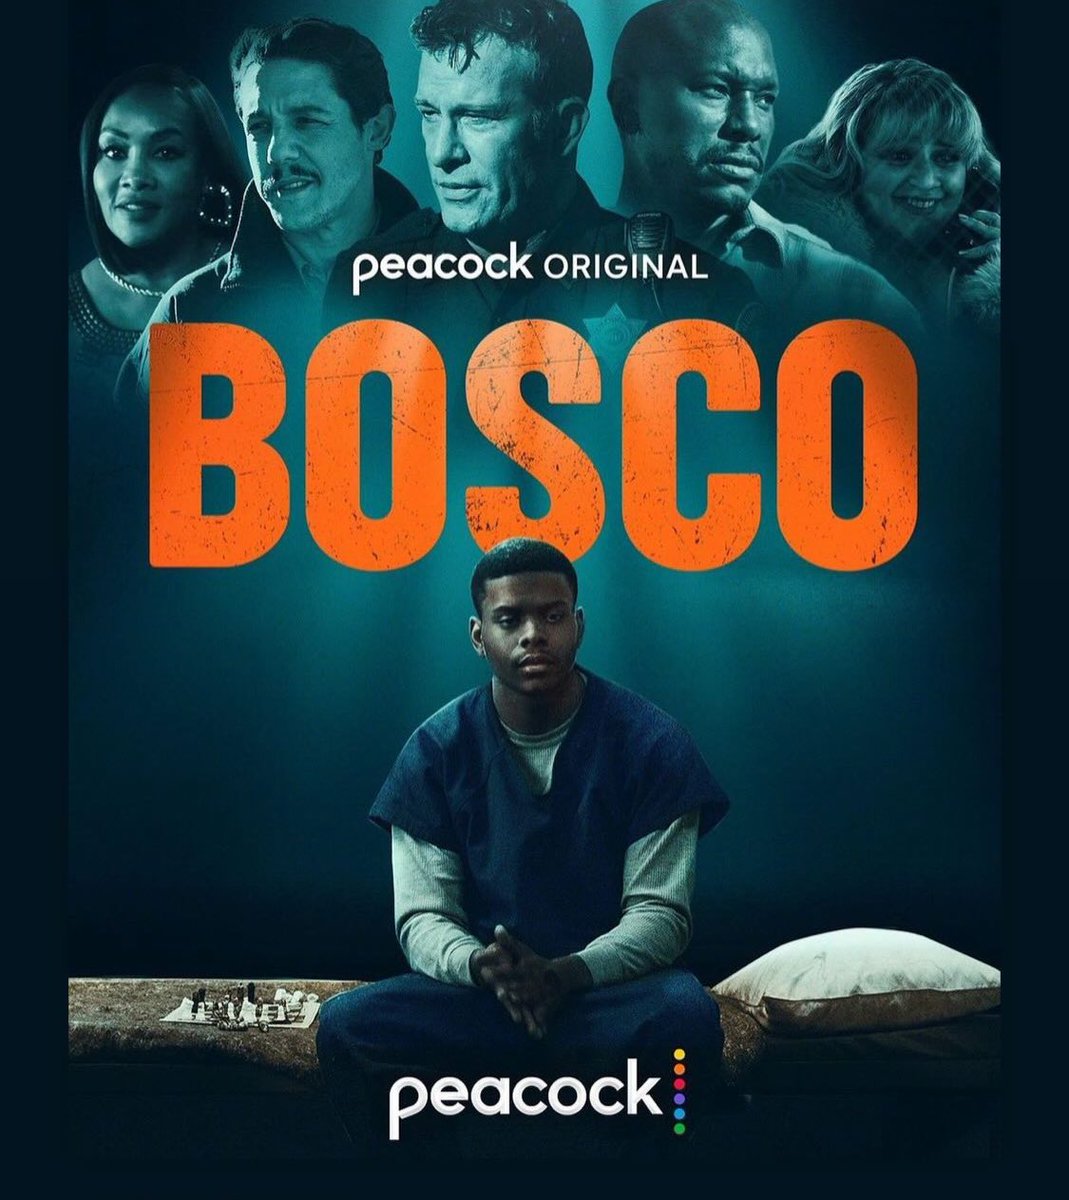 Check out or new film Bosco on @peacock Feb 2. With original music by @SnoopDogg and more. @DCYOUNGFLY @ThomasJane